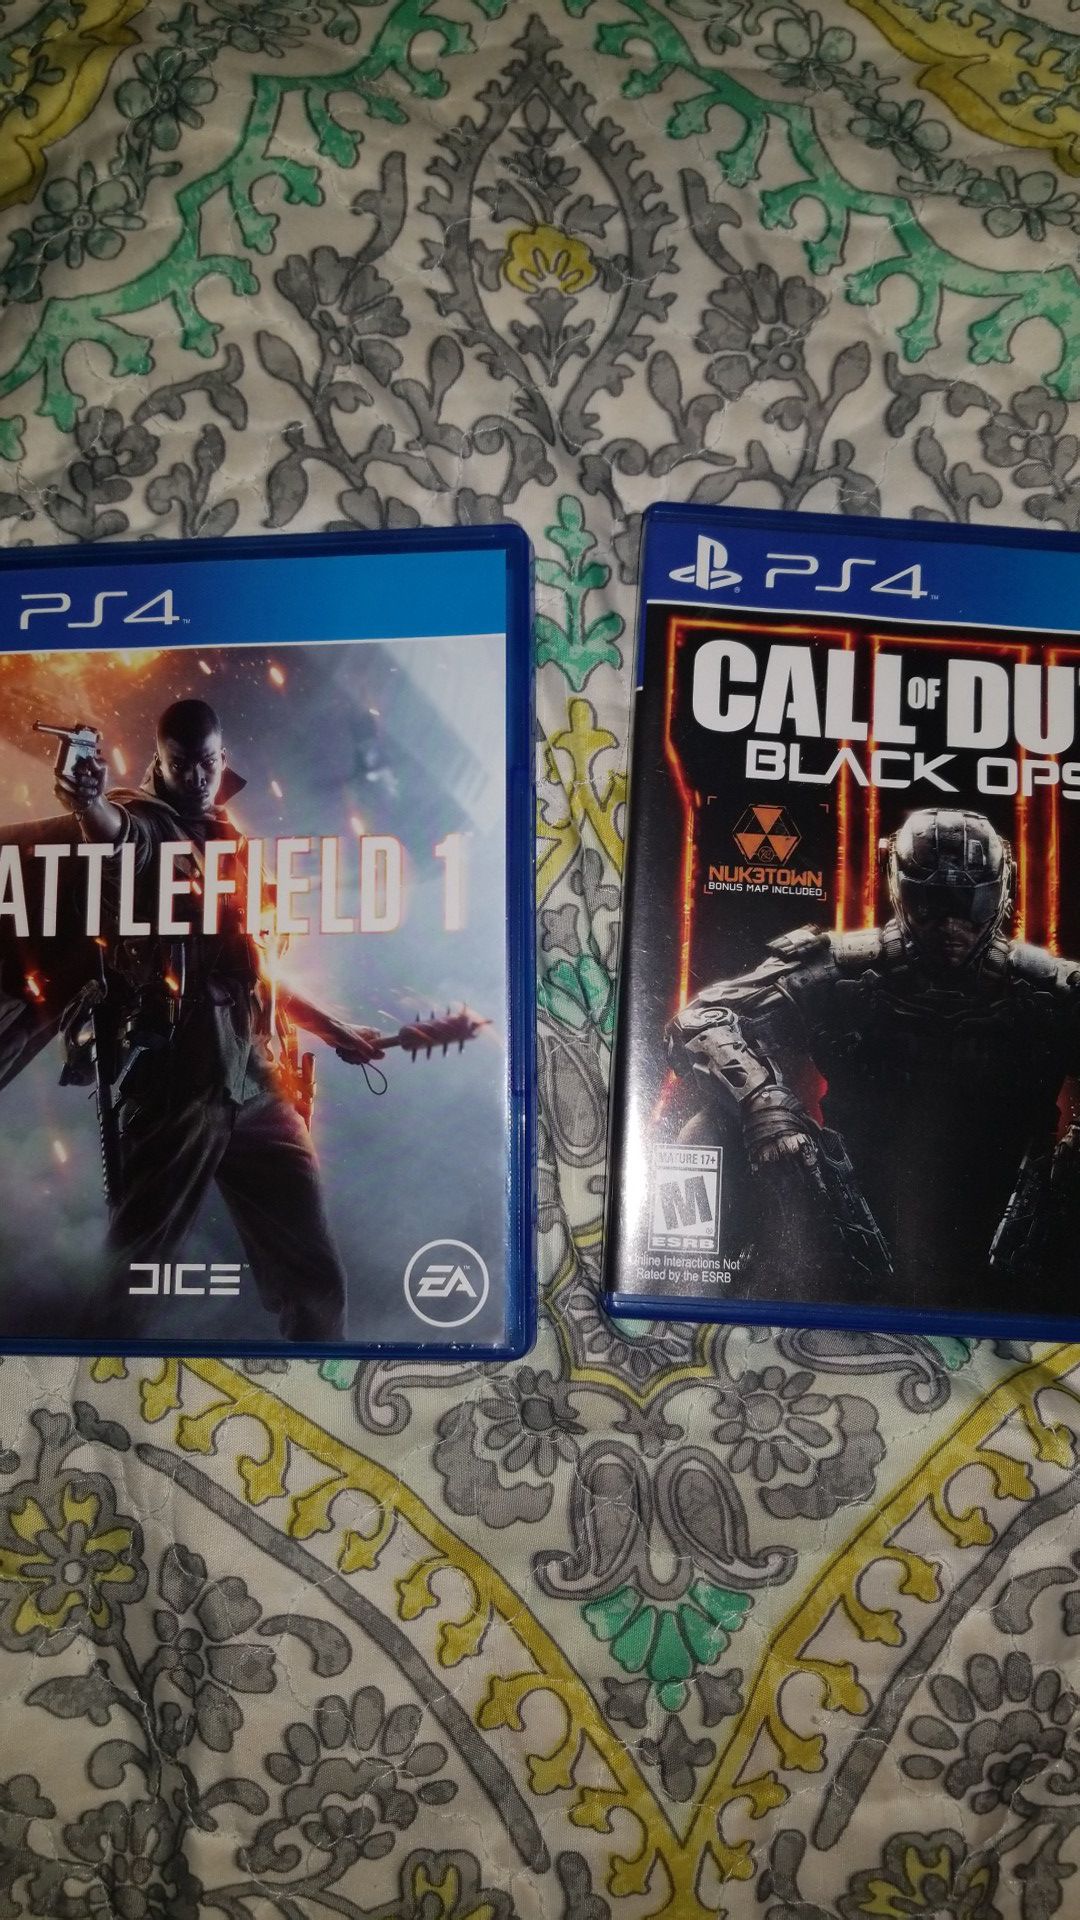 Ps4 call of duty 3 and battlefield